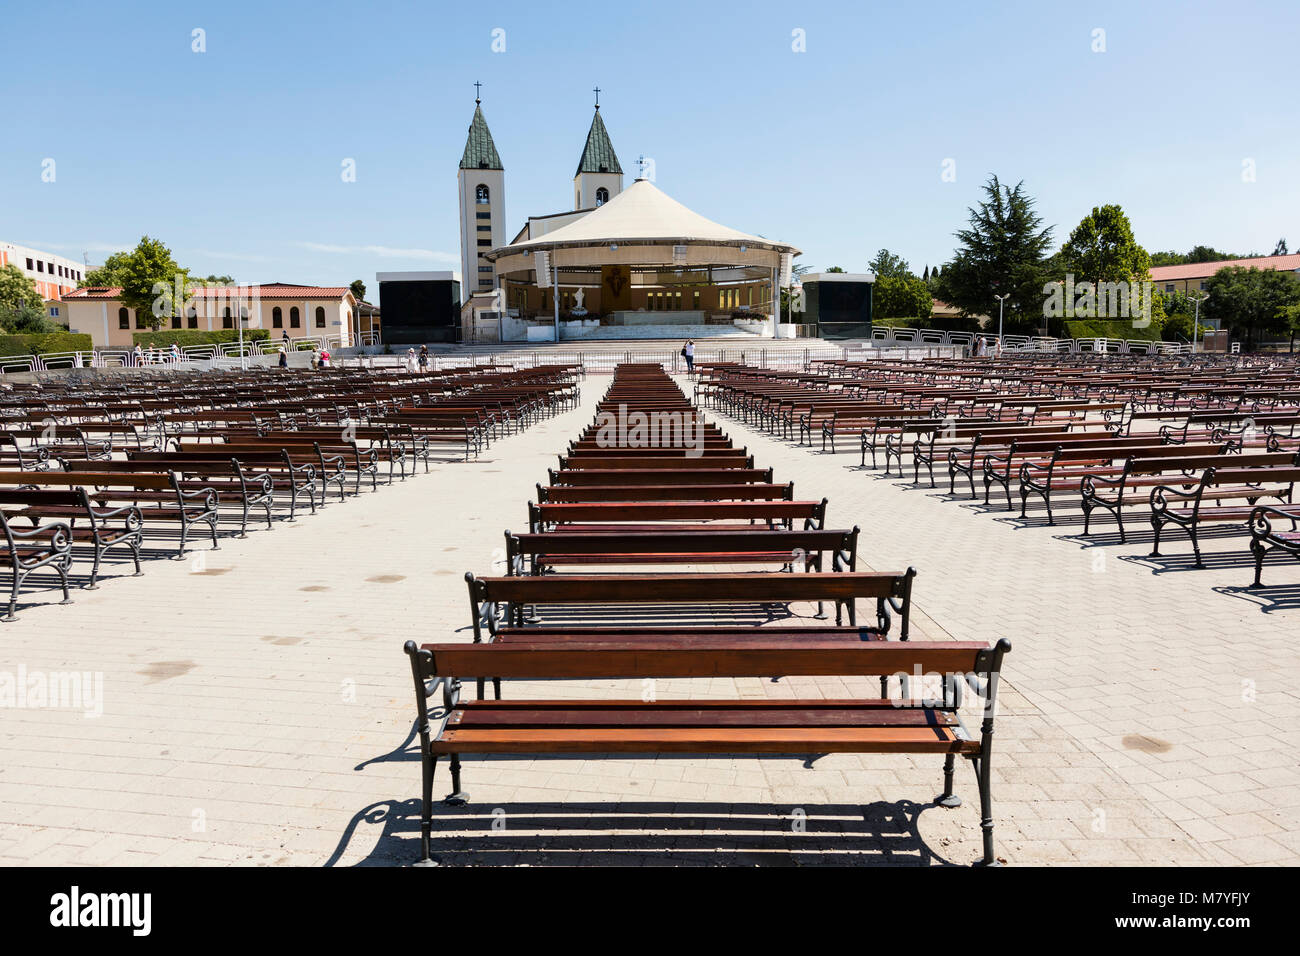 Medjugorje, Bosnia and Herzegowina, July 15 2017: Saint James Church with wooden benches in Medjugorje is a popular destination for pilgrims Stock Photo